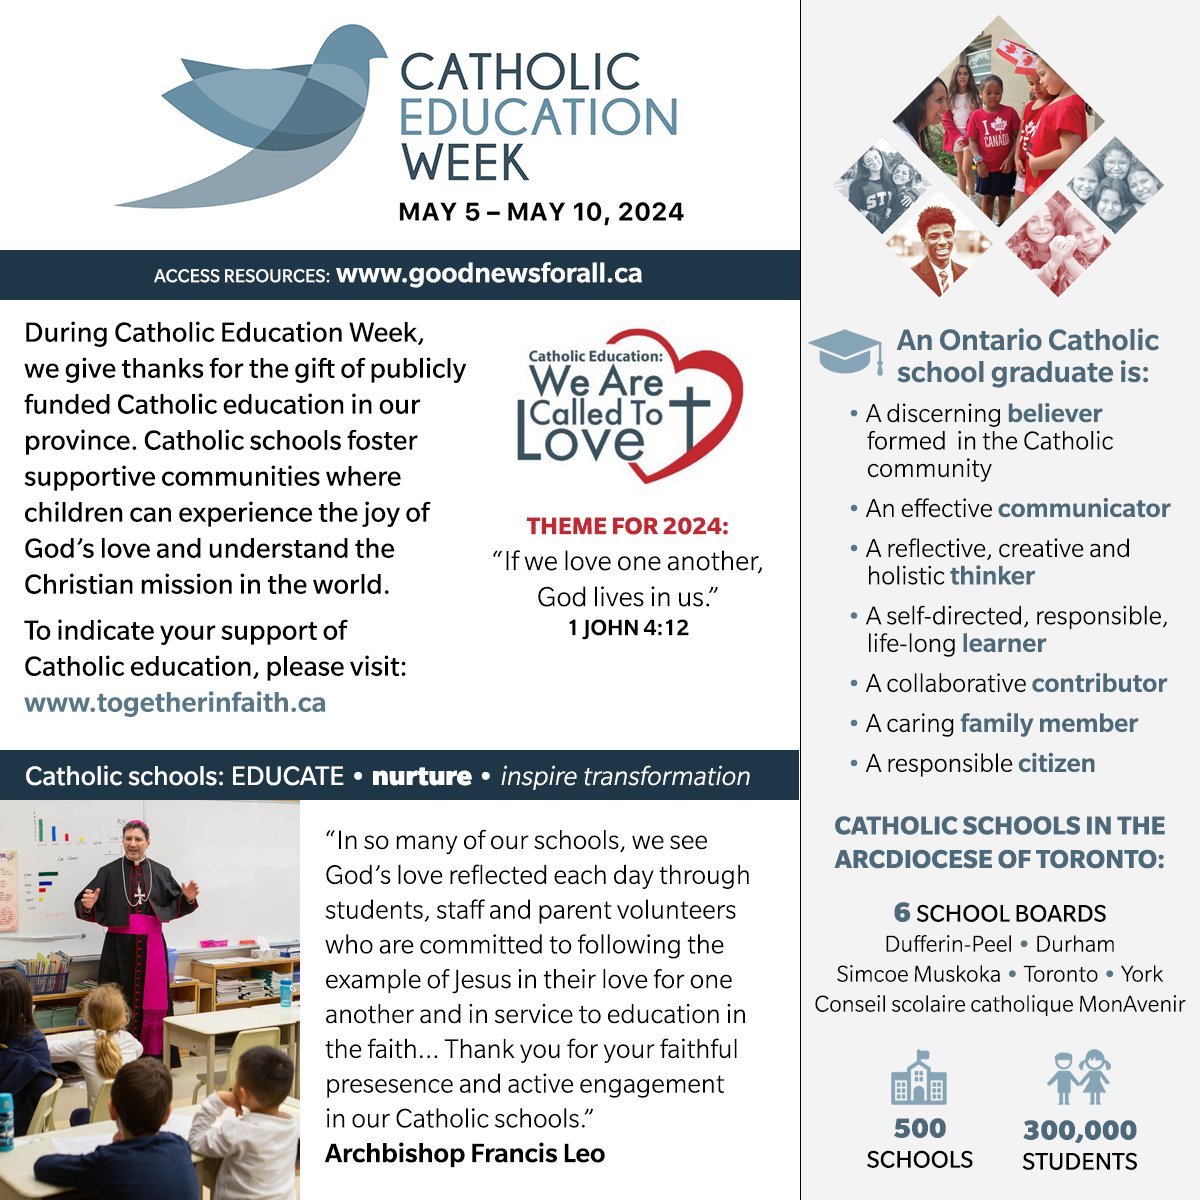 May 5-10, 2024 is Catholic Education Week! This year's theme is #CatholicEducation: We are called to love, inspired by 1 John 4:12: 'If we love one another, God lives in us.' Learn more at goodnewsforall.ca #CEW2024